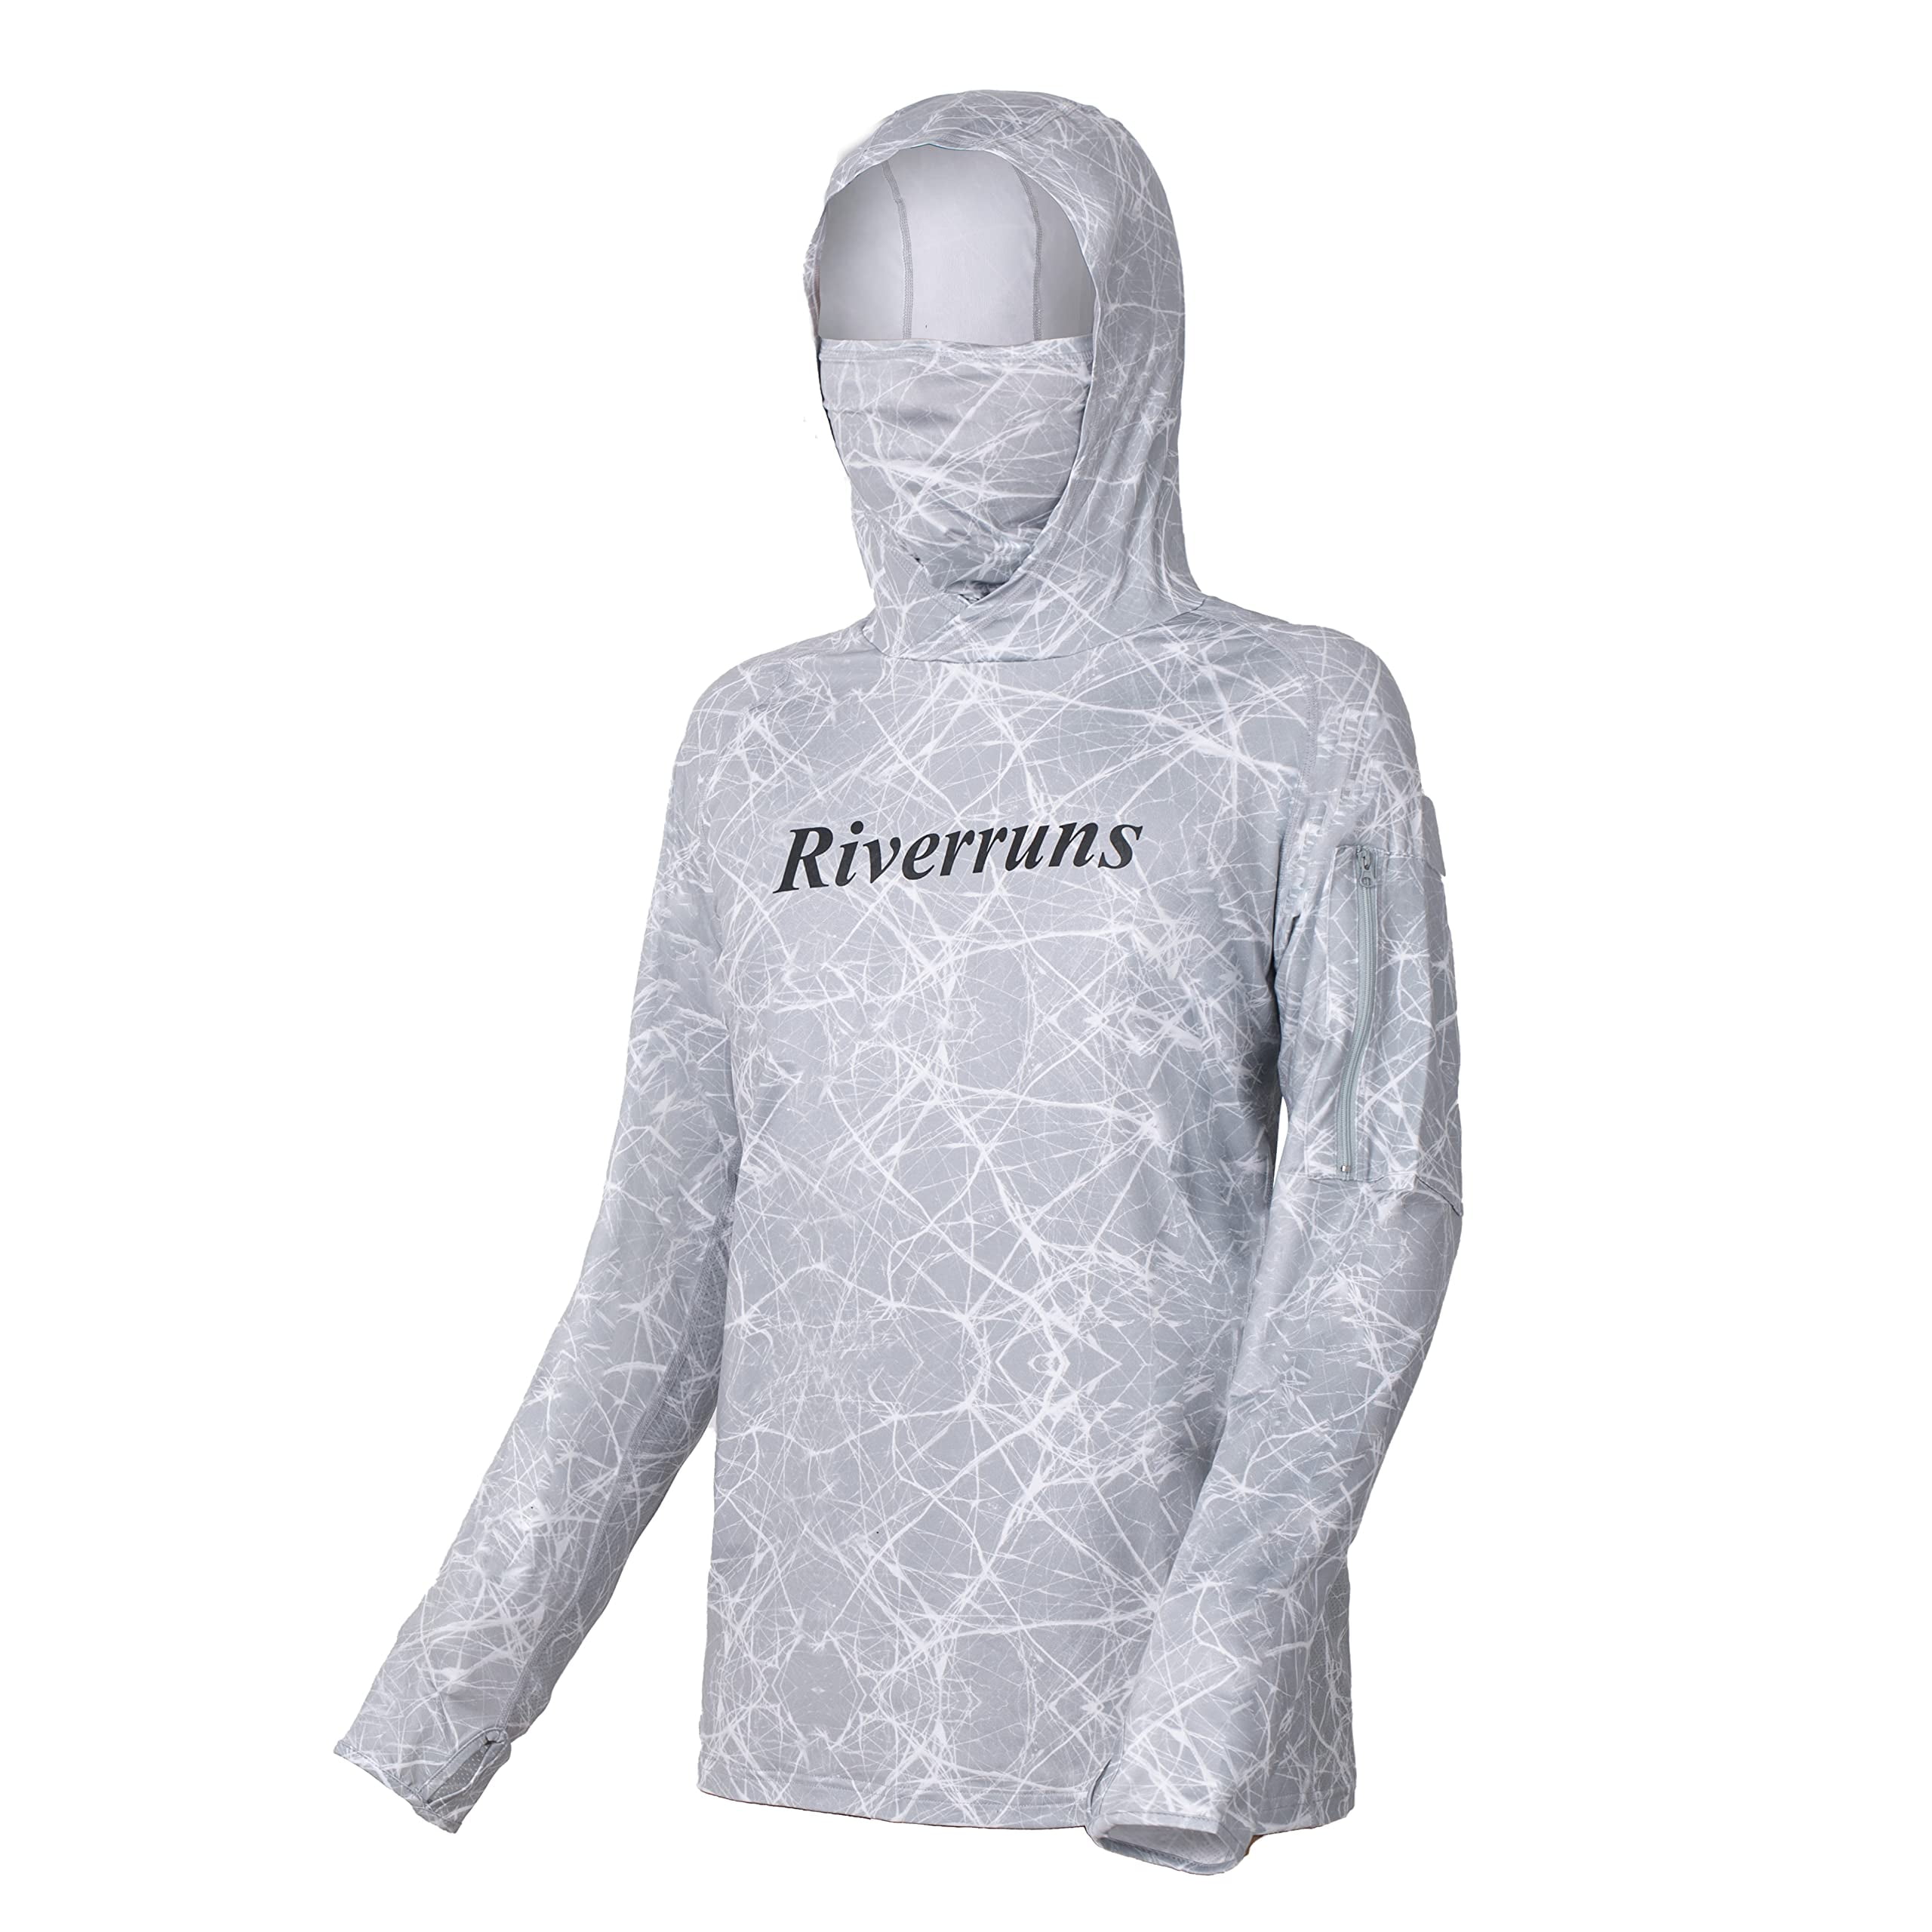  Riverruns UPF 50+ Long Sleeve Fishing Shirt, Light Weight Fishing  Shirt Men with Sun Protection Outdoor Activity : Clothing, Shoes & Jewelry